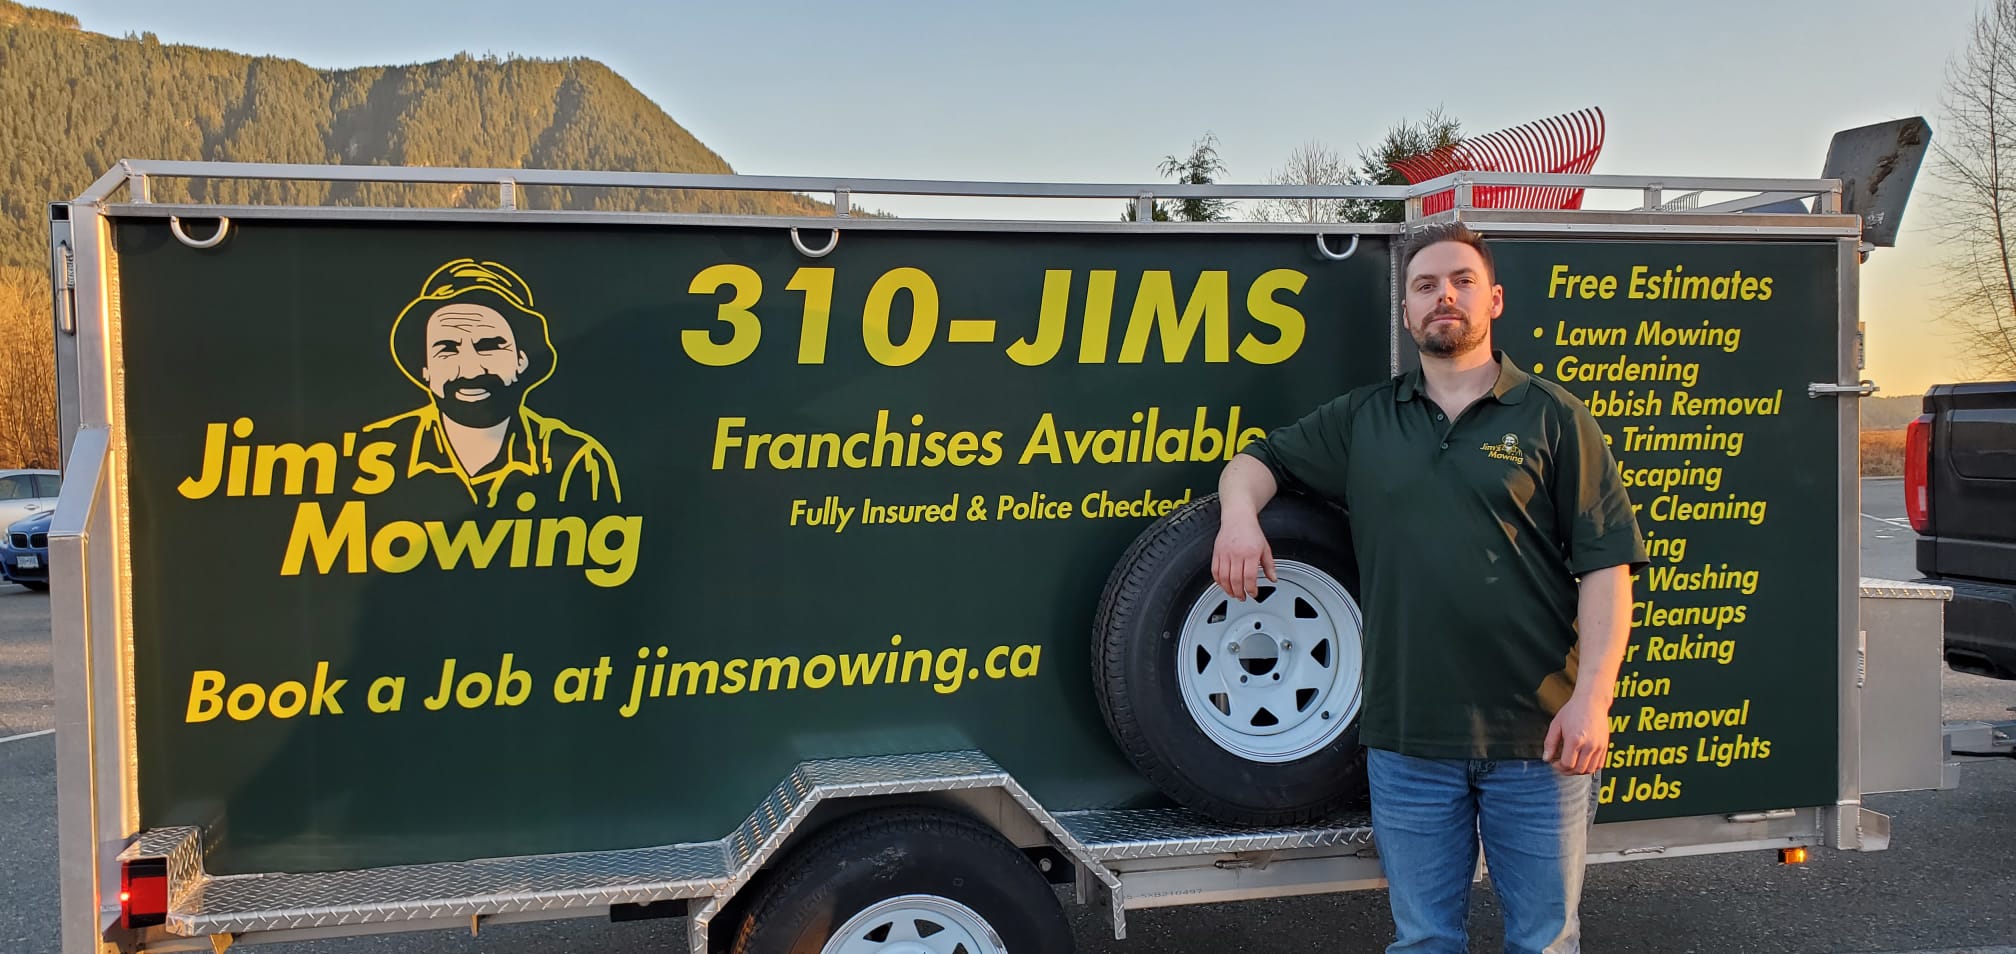 Jim’s Mowing Lawn Service Franchise in British Columbia